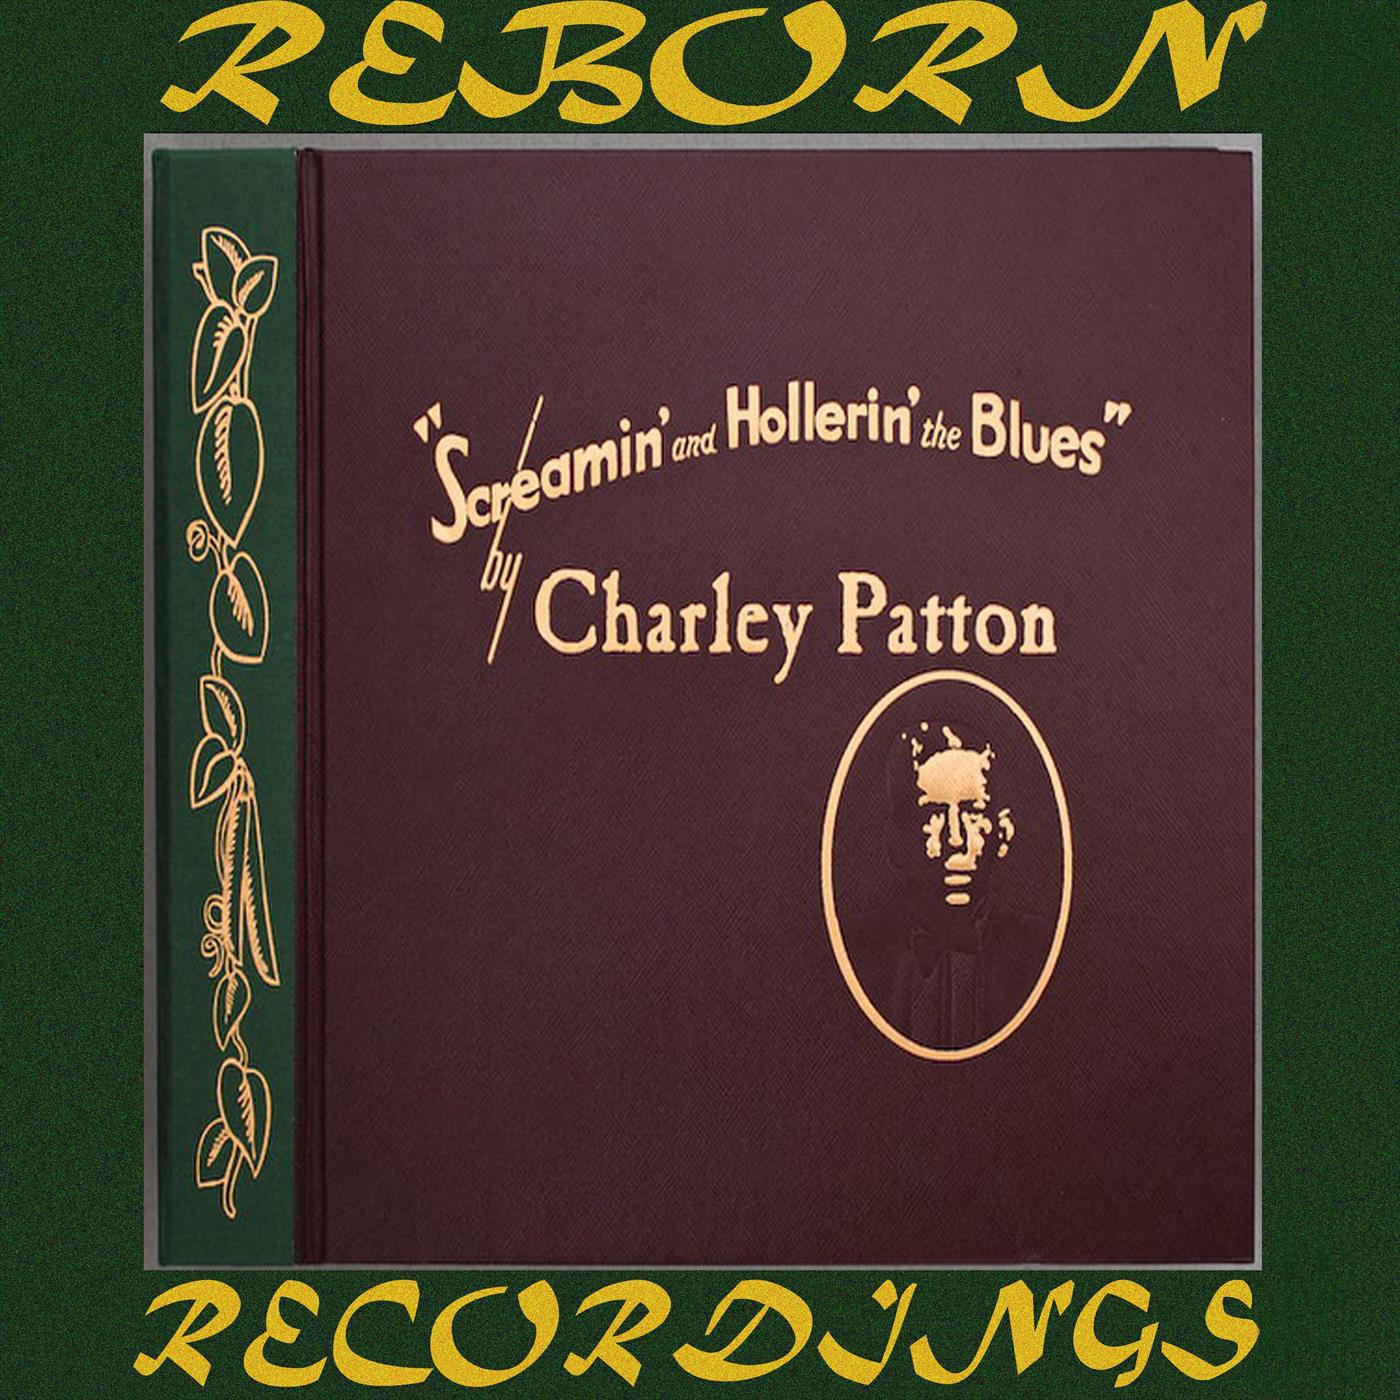 Screamin' and Hollerin' the Blues The Worlds of Charley Patton, Vol.1 (HD Remastered)